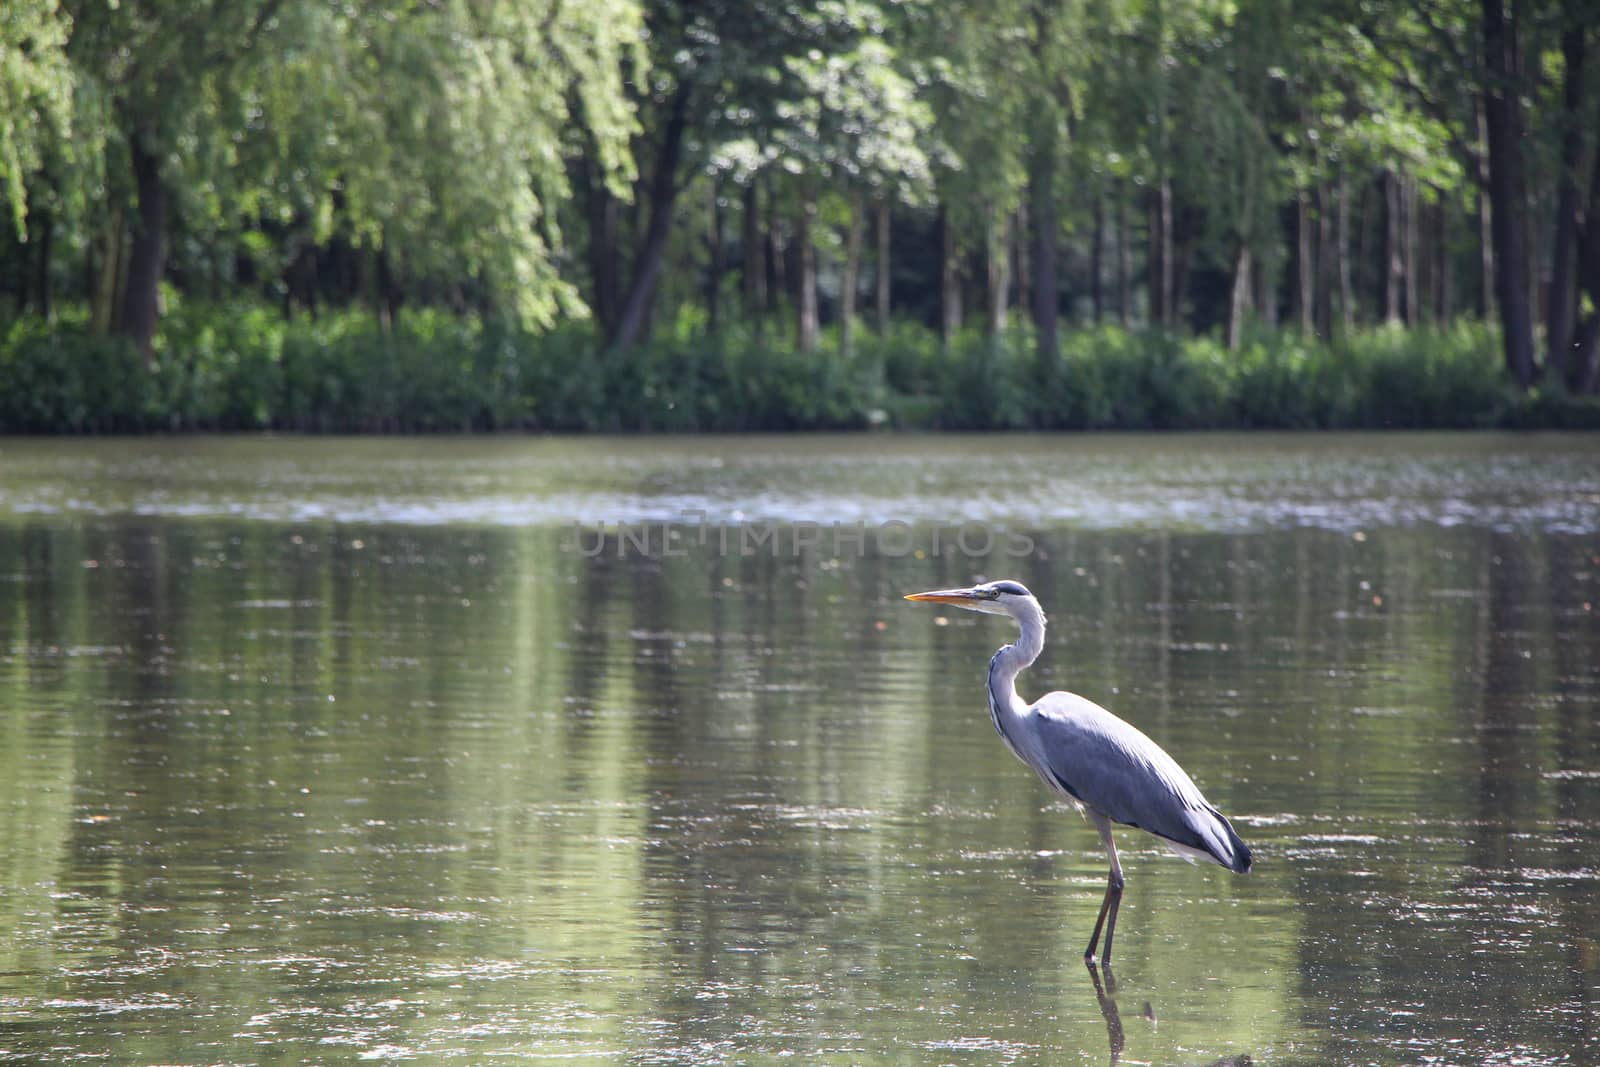 Grey heron standing in lake surrounded by trees and bushes.